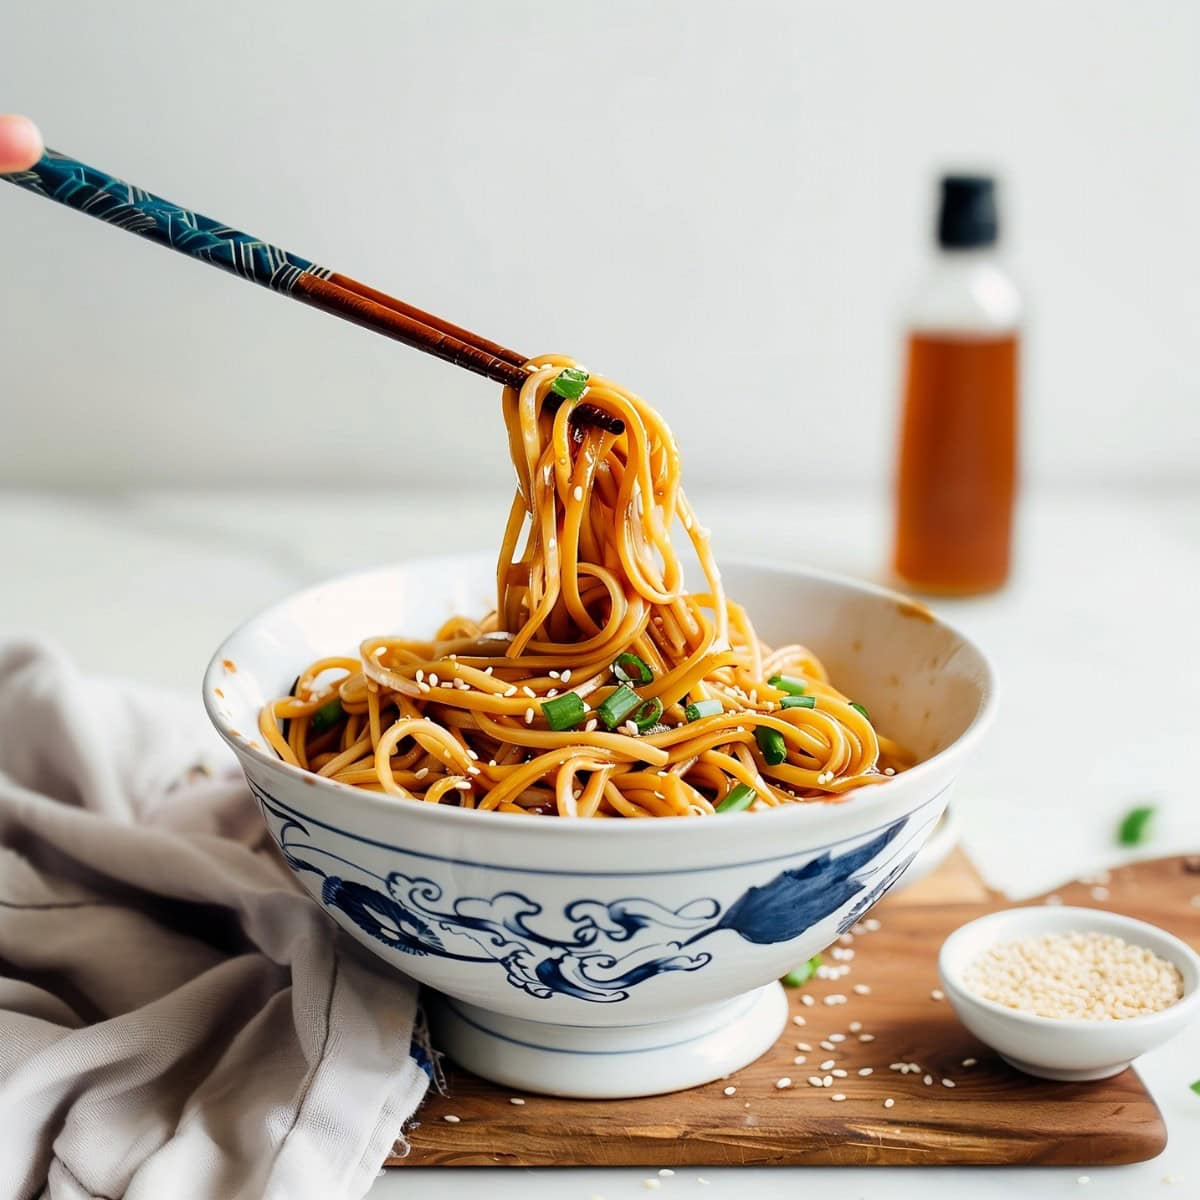 Flavorful hibachi noodles, tossed with soy sauce, sesame oil, and fresh herbs for an authentic taste